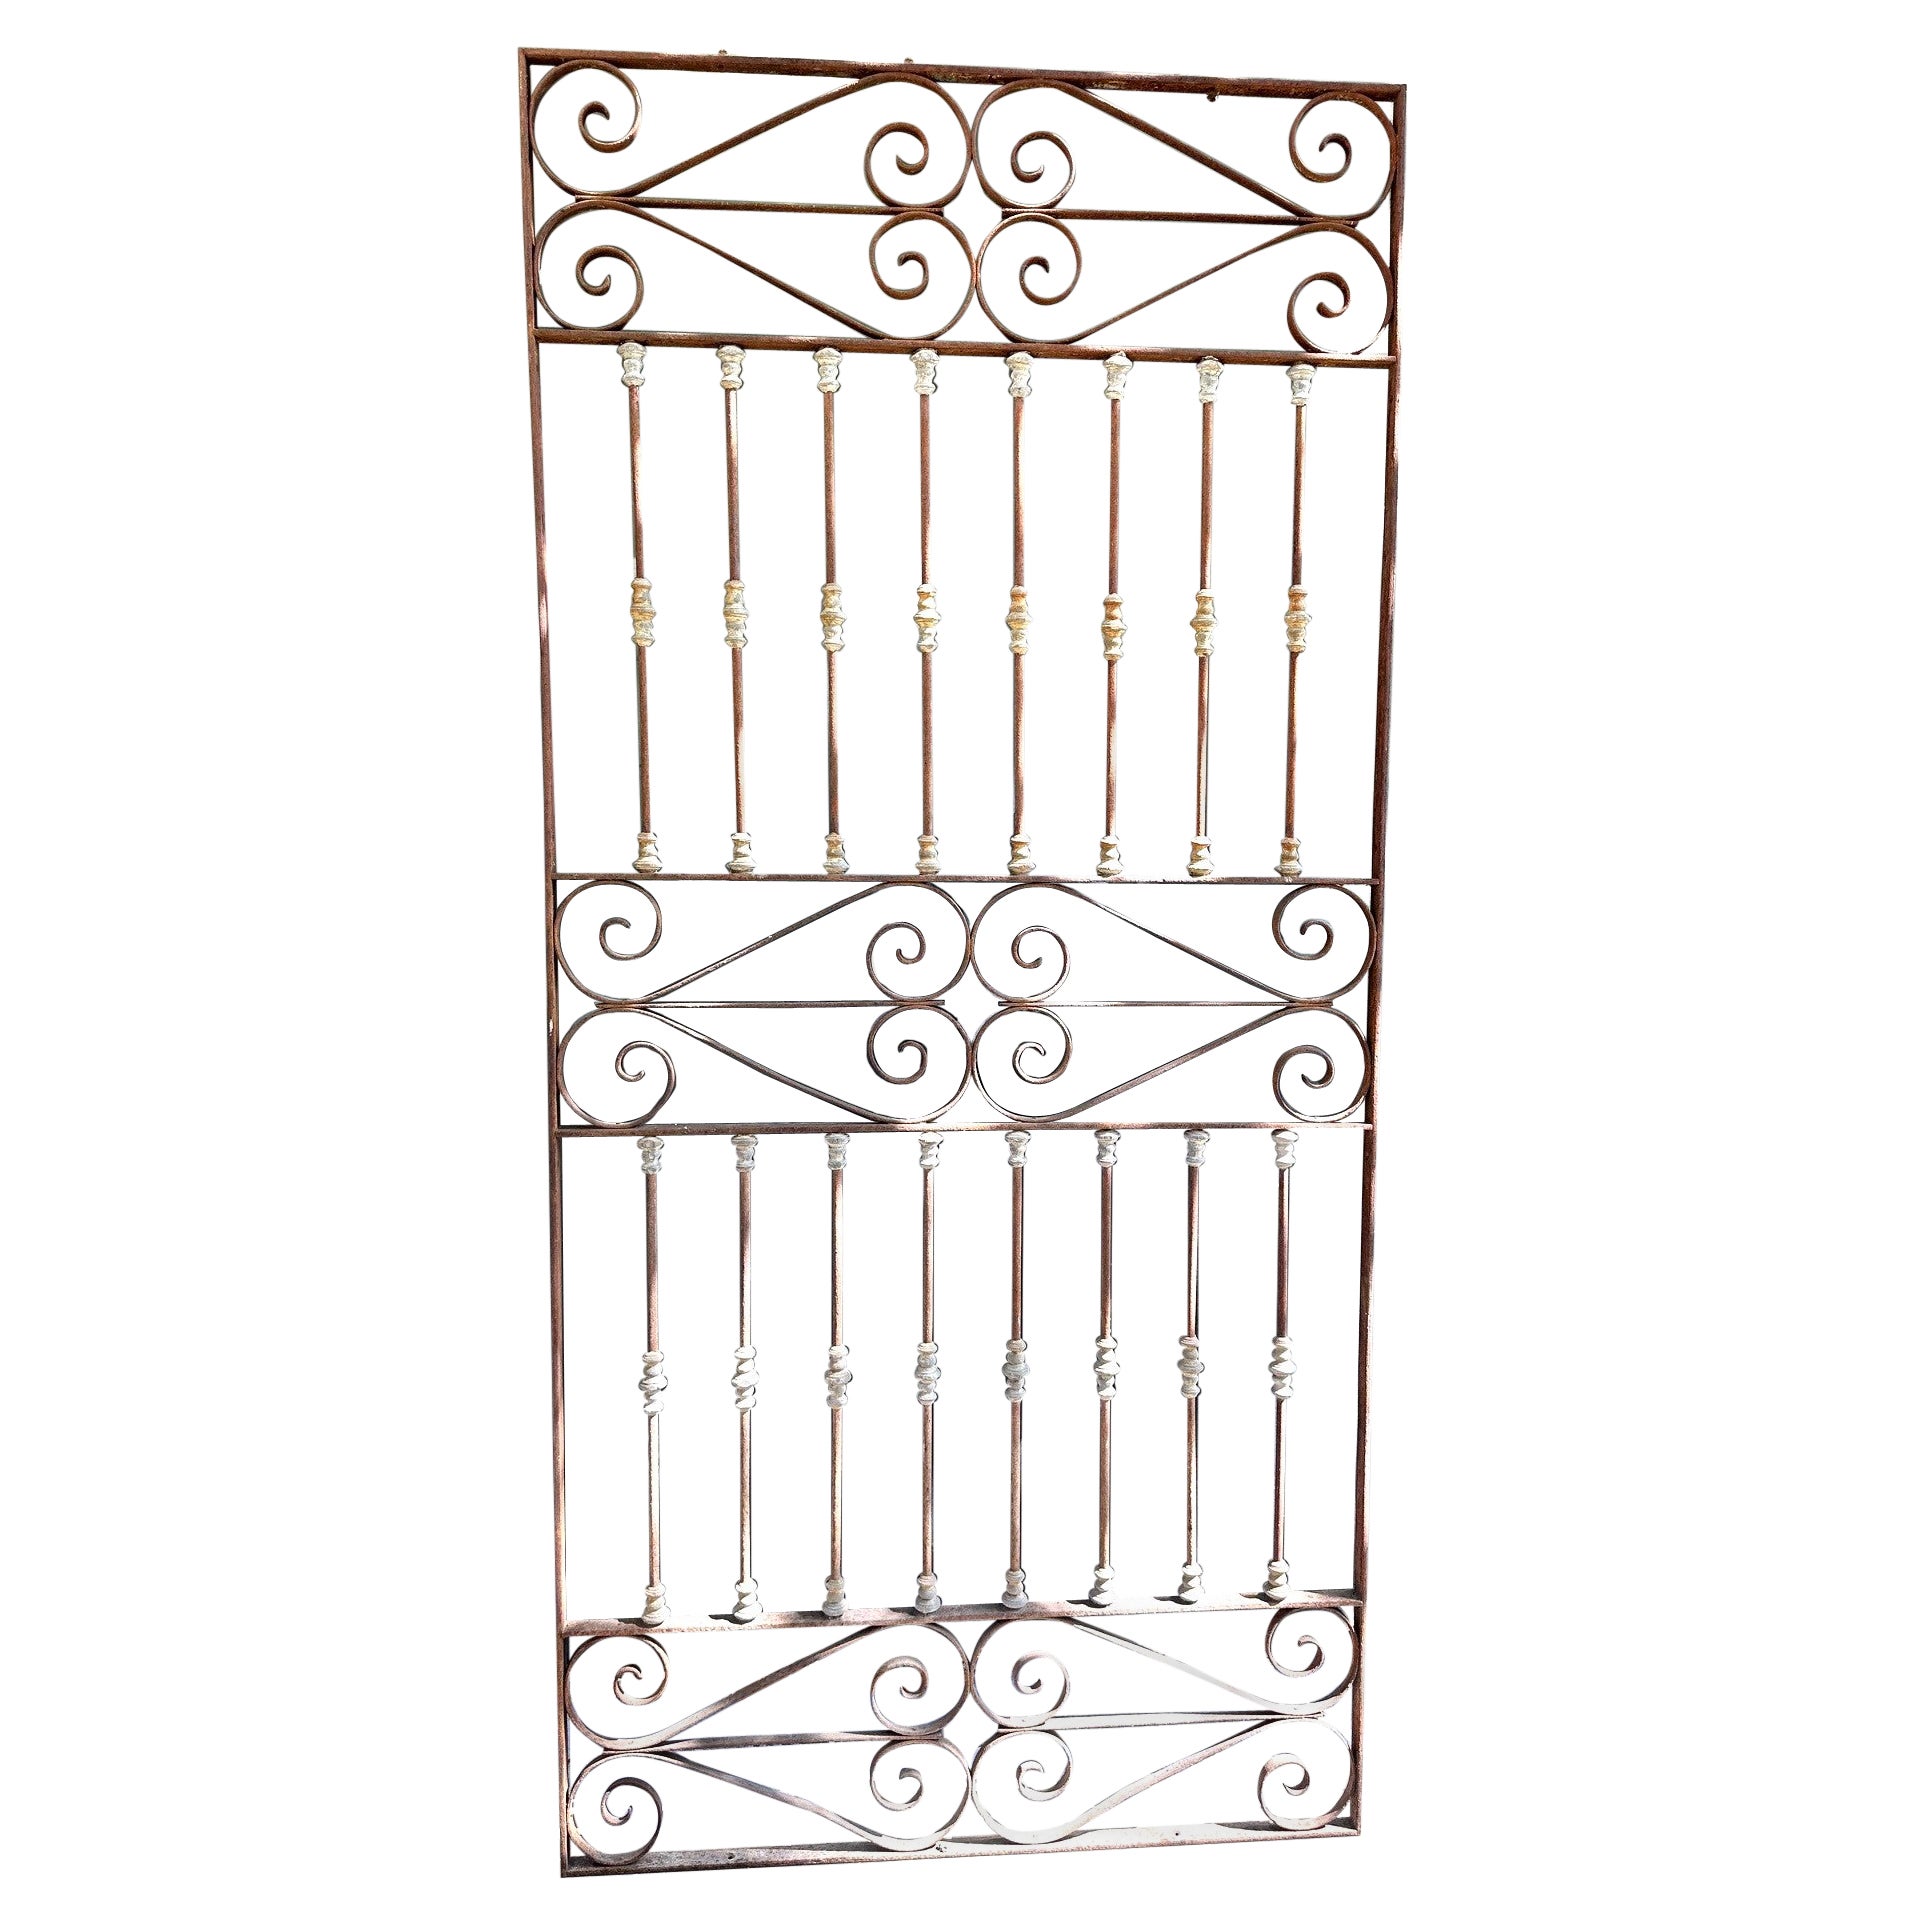 Rustic Antique Wrought Iron Driveway Garden Entrance Metal Gate for portal entry For Sale